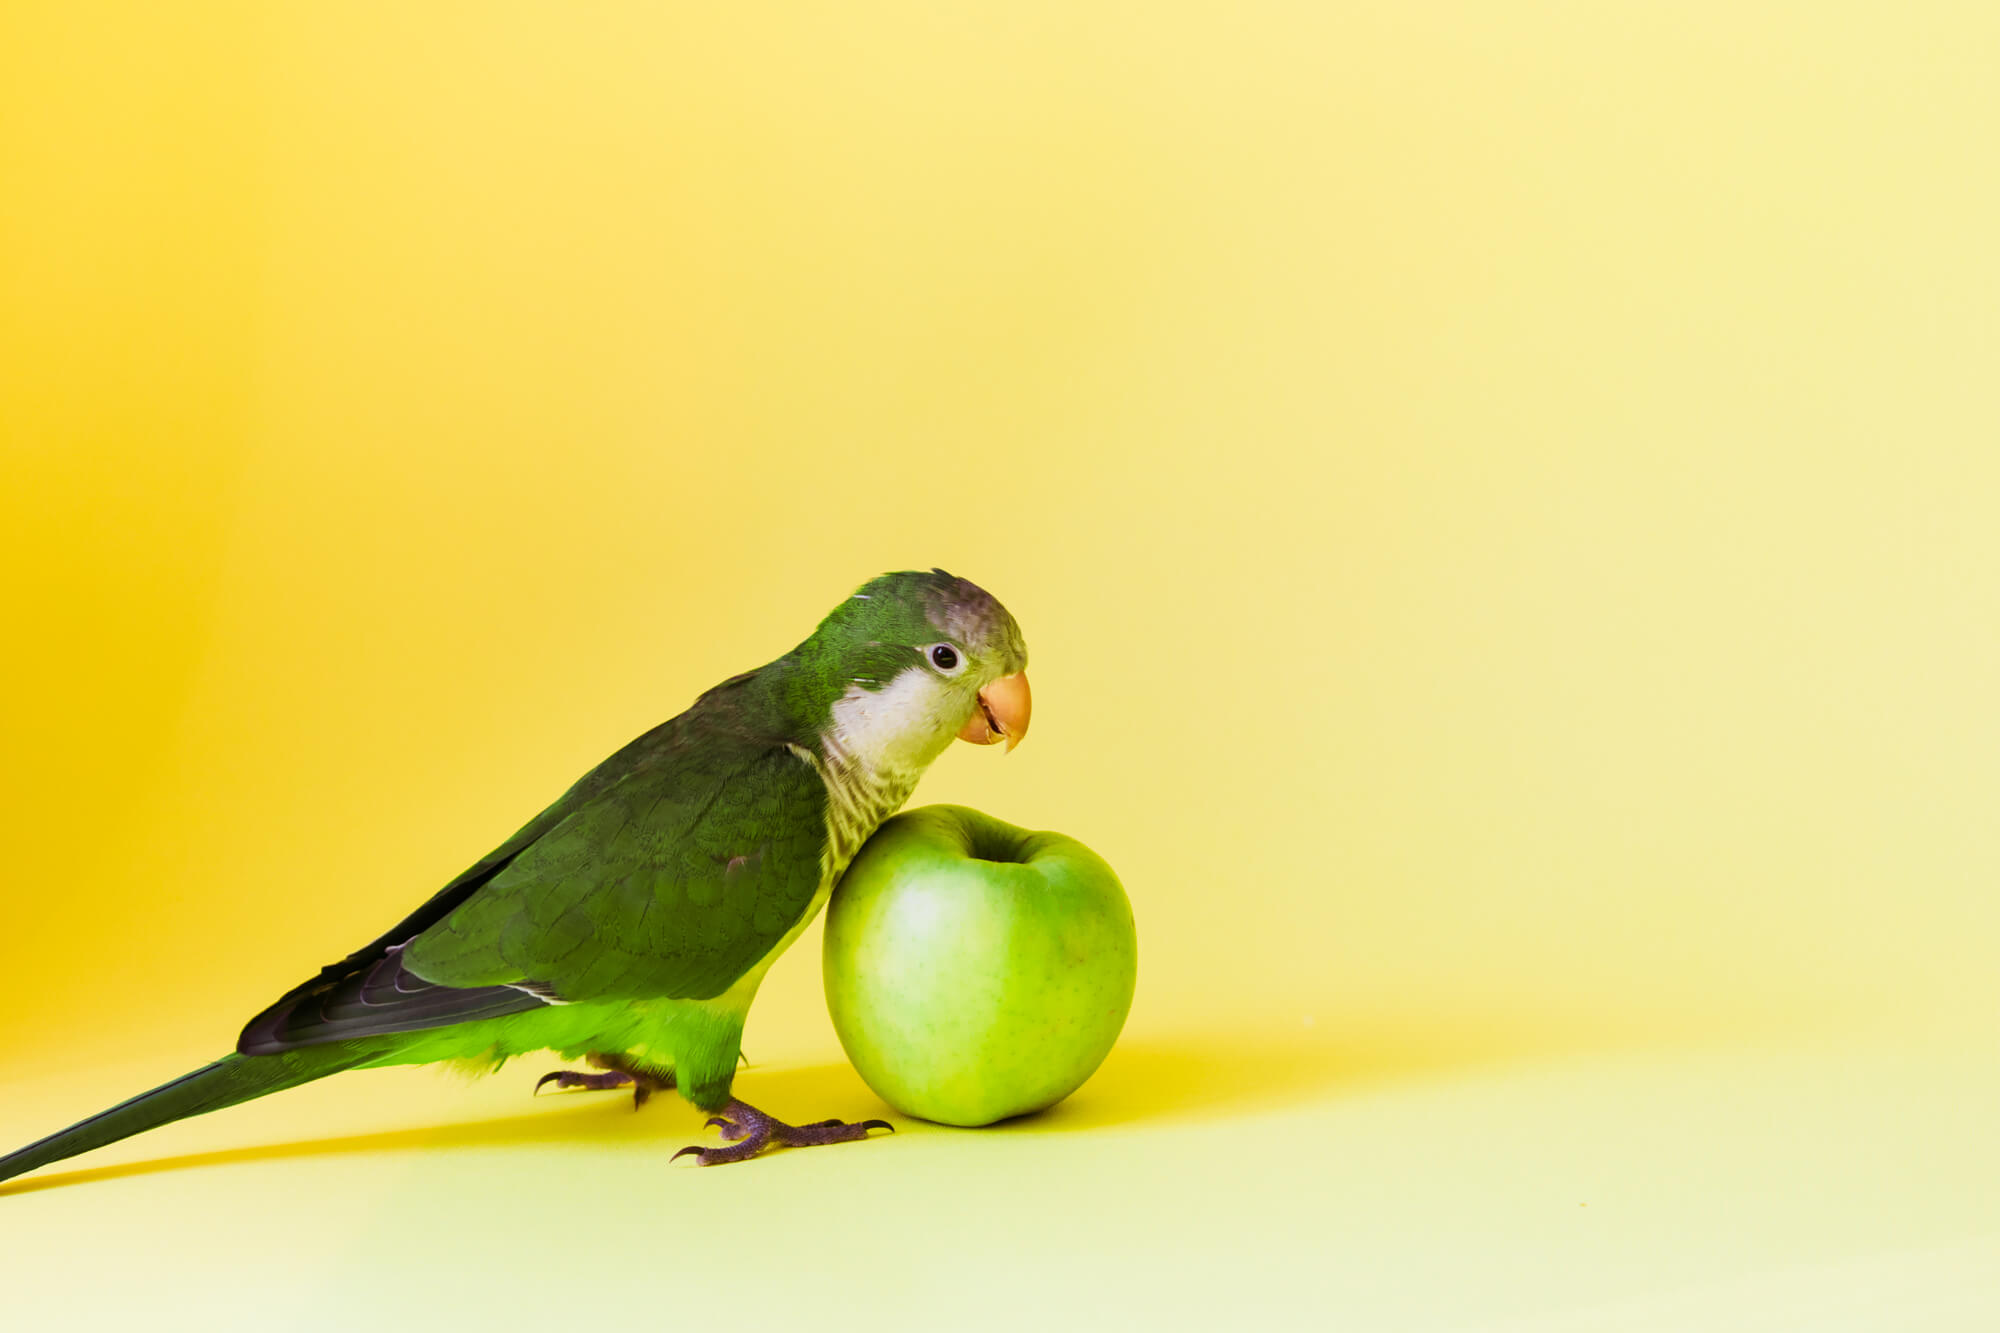 Green parrot monk breed with a round sharp beak